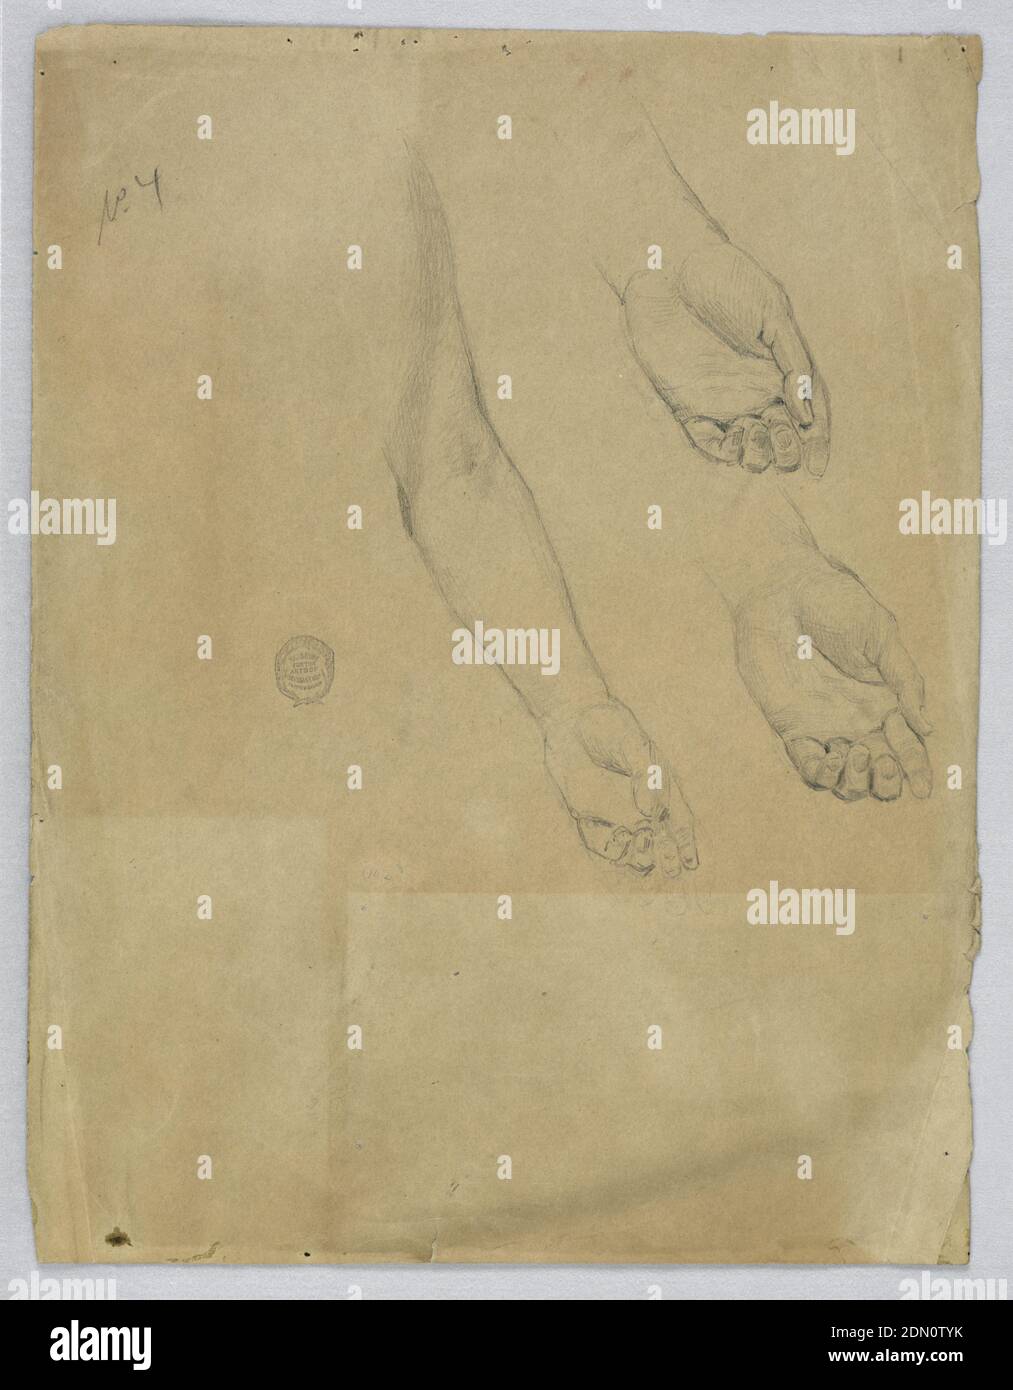 Three Studies of a Left Hand, Francis Augustus Lathrop, American, 1849 - 1909, Graphite on grey-brown paper, Hand with palm up, shown from center. To the right, two studies of the hand in almost the same position., USA, ca. 1895, figures, Drawing Stock Photo